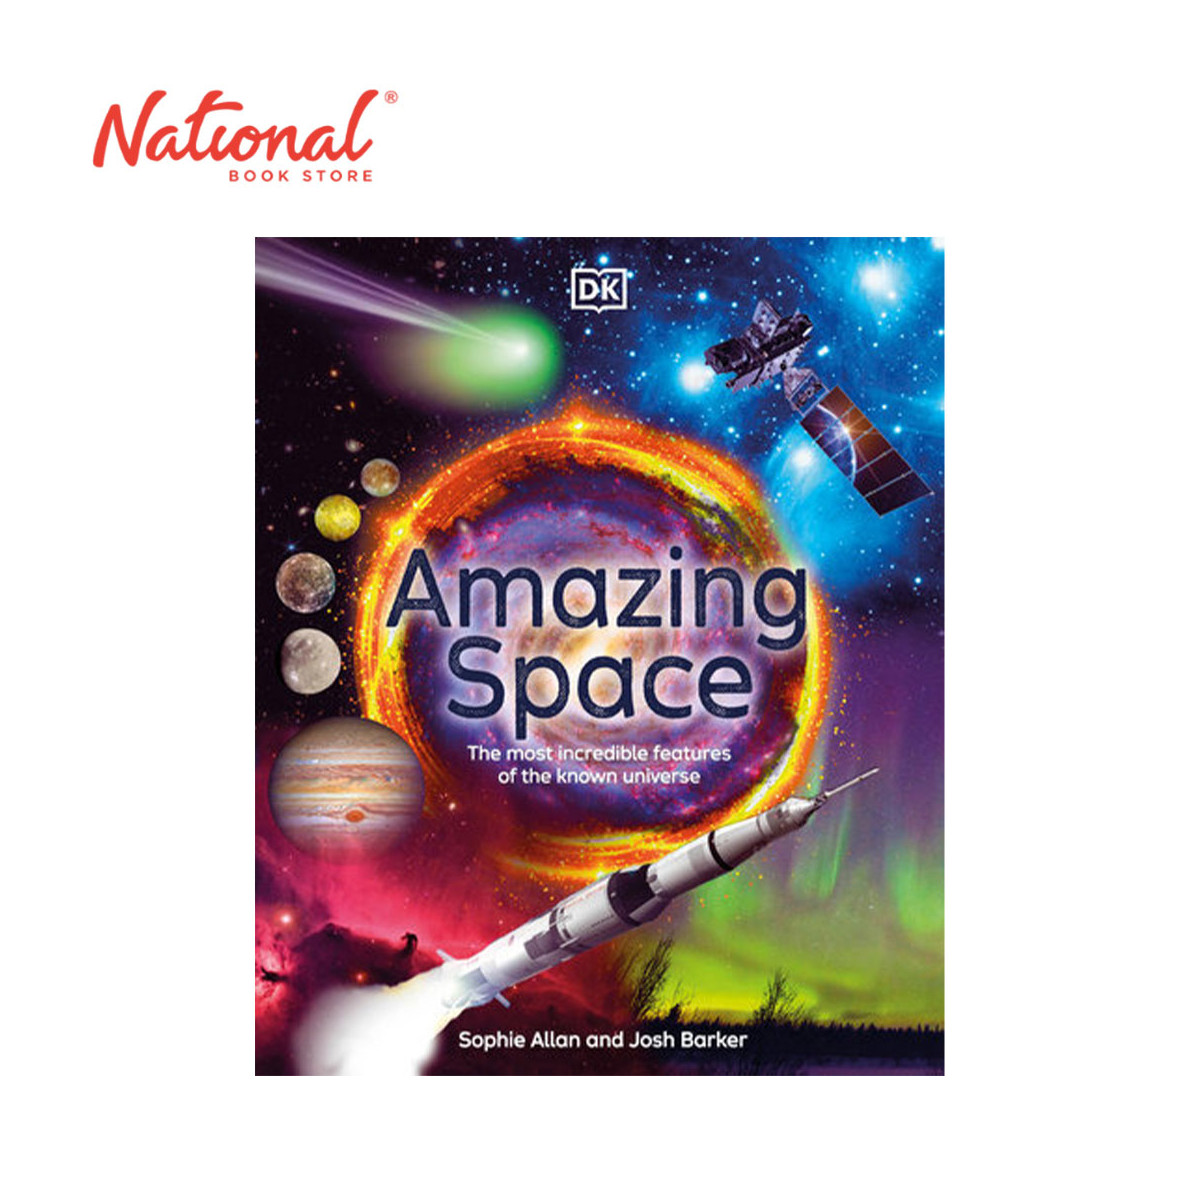 *PRE-ORDER* Amazing Space: The Most Incredible Features of the Known Universe by Sophie Allan - Hardcover